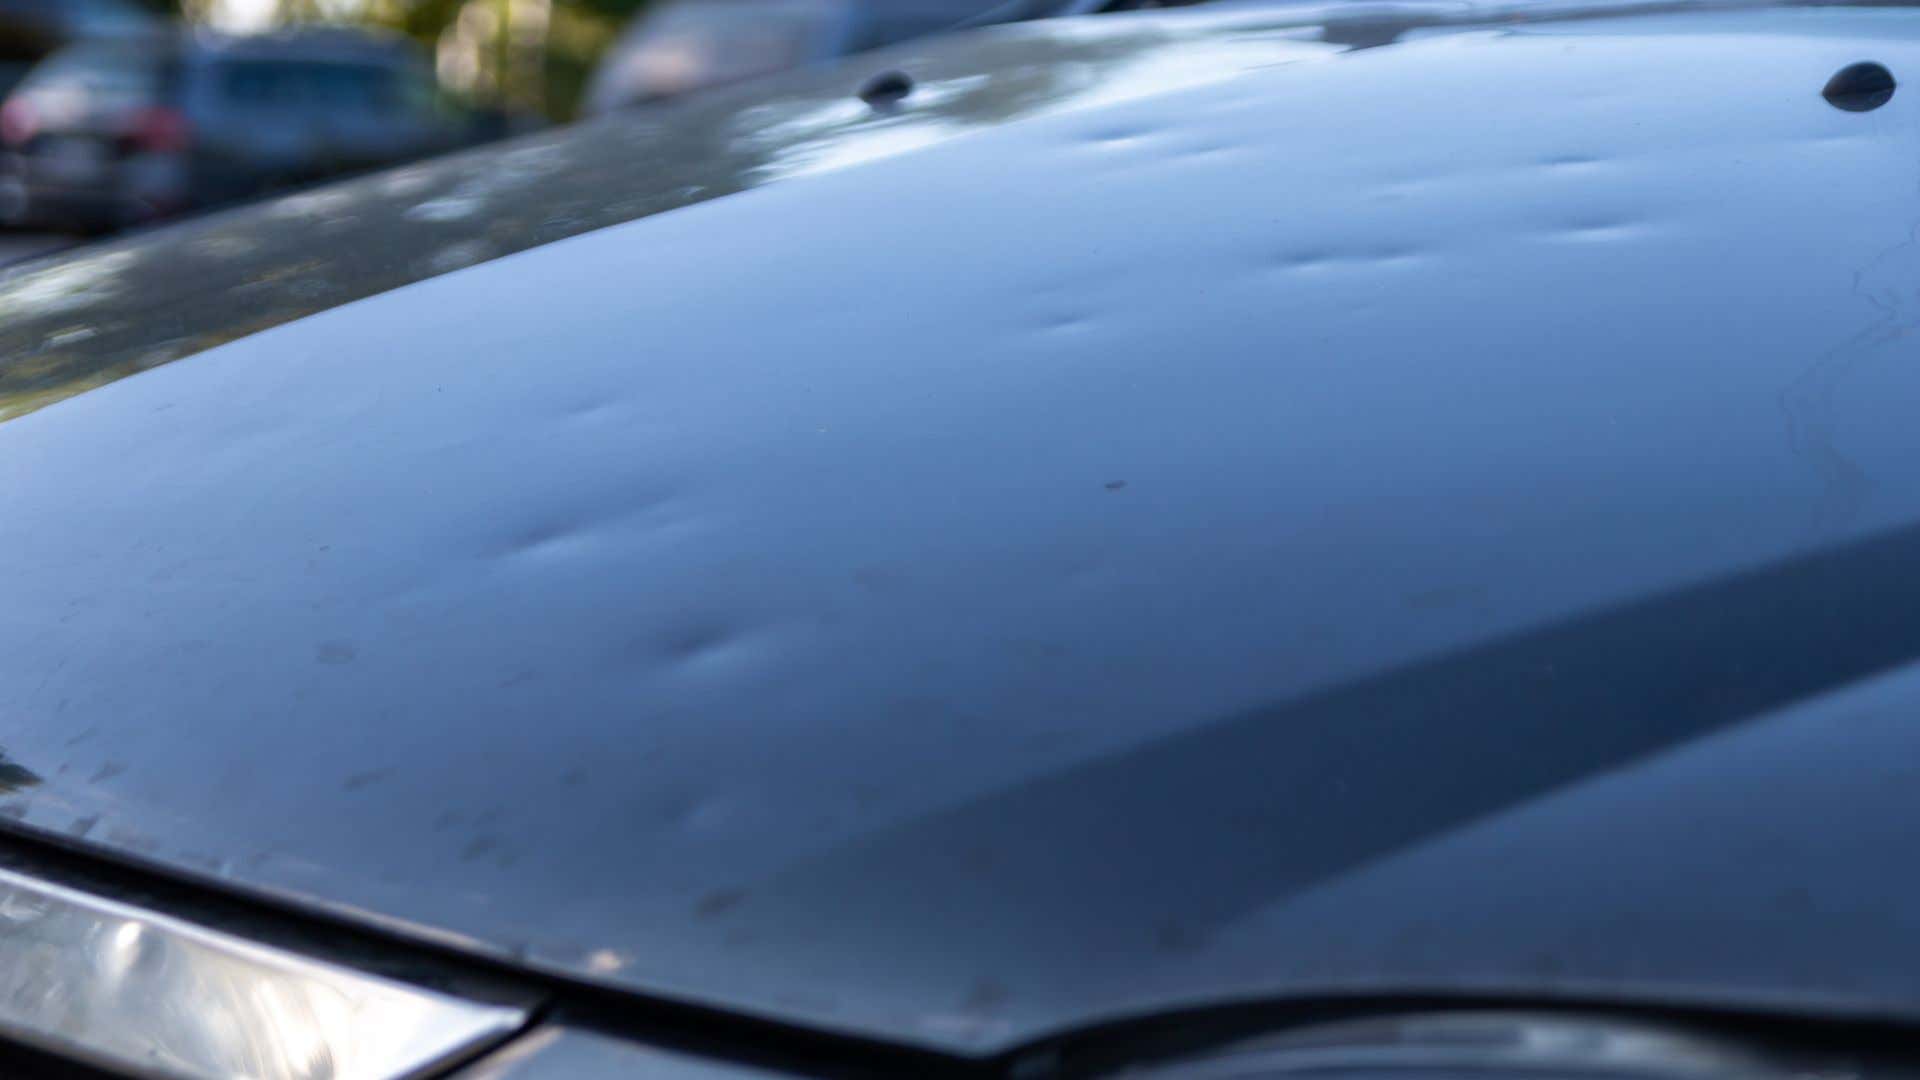 How To Remove Small Dents From Car Bonnet